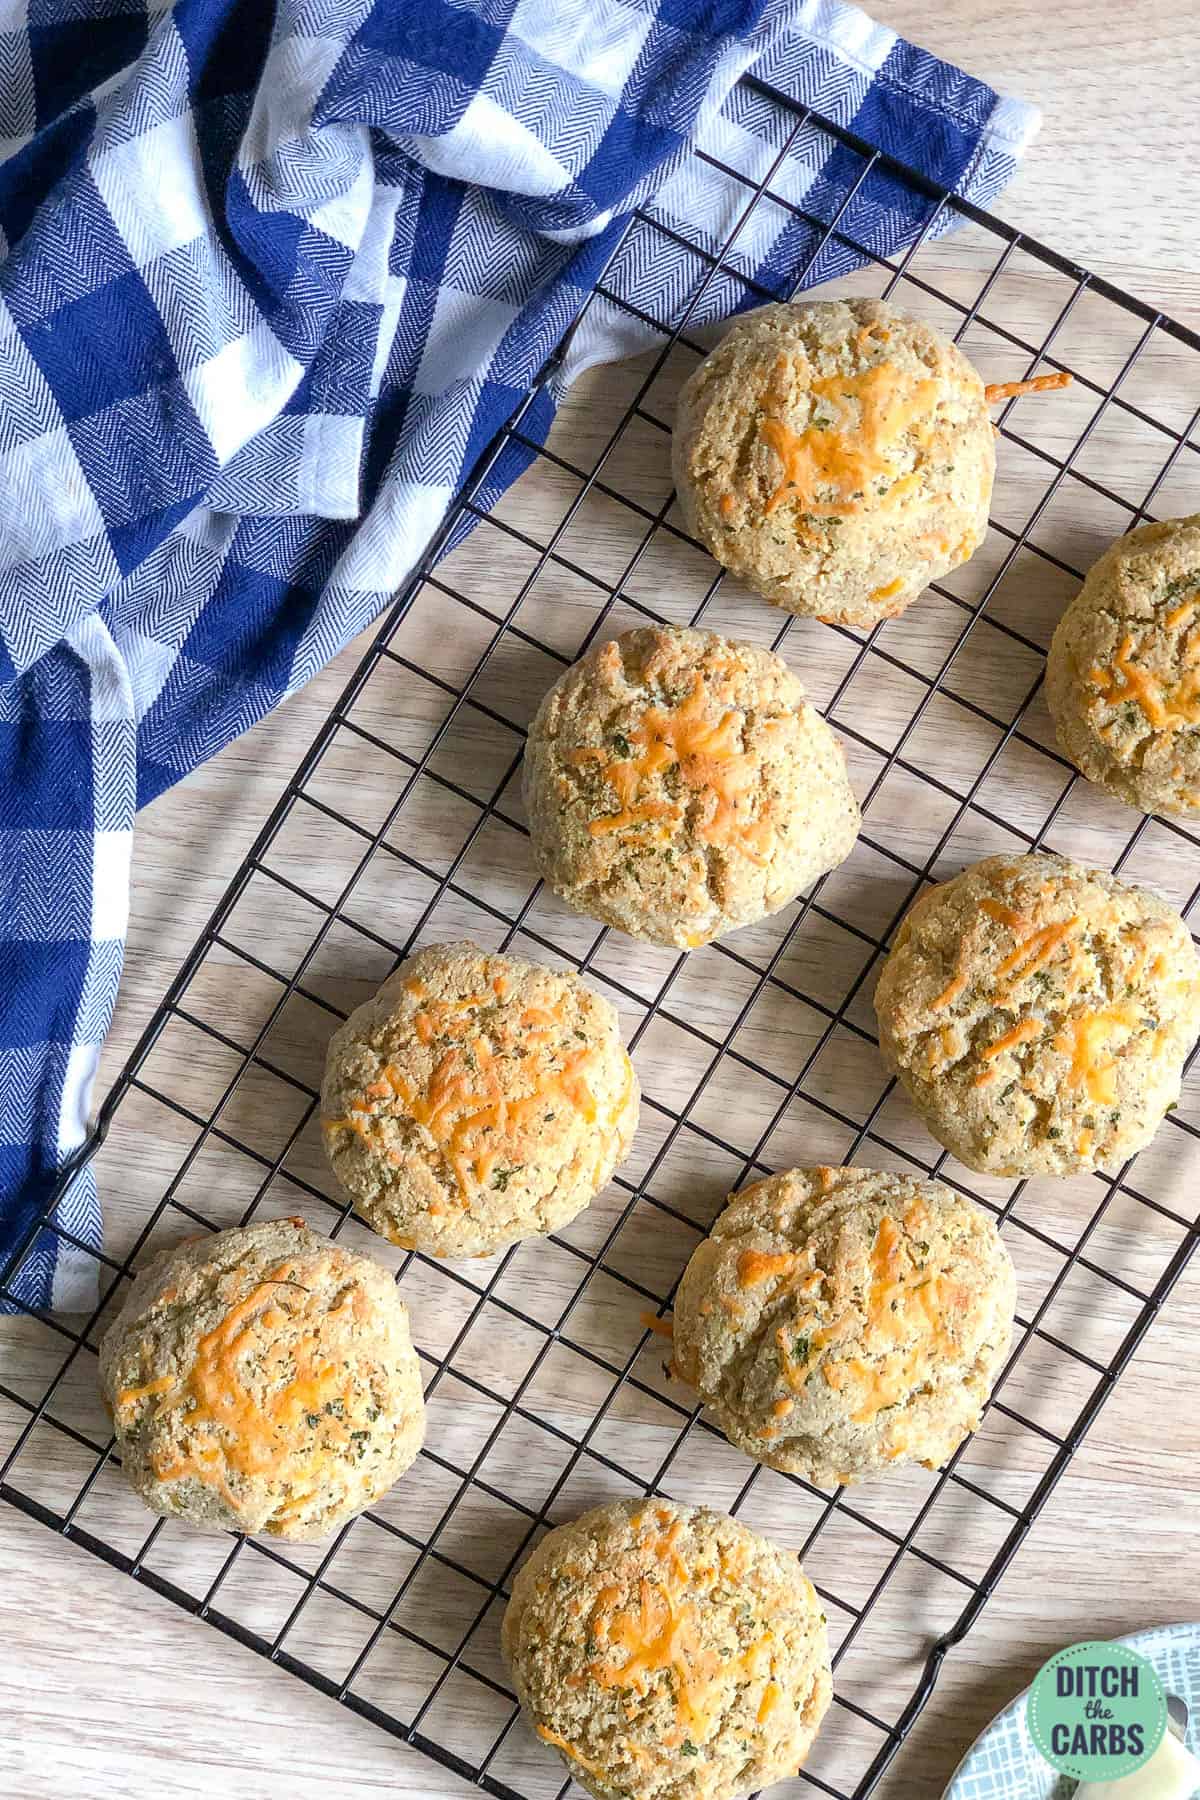 Keto cheddar biscuits(scones) cooling on a wire rack.